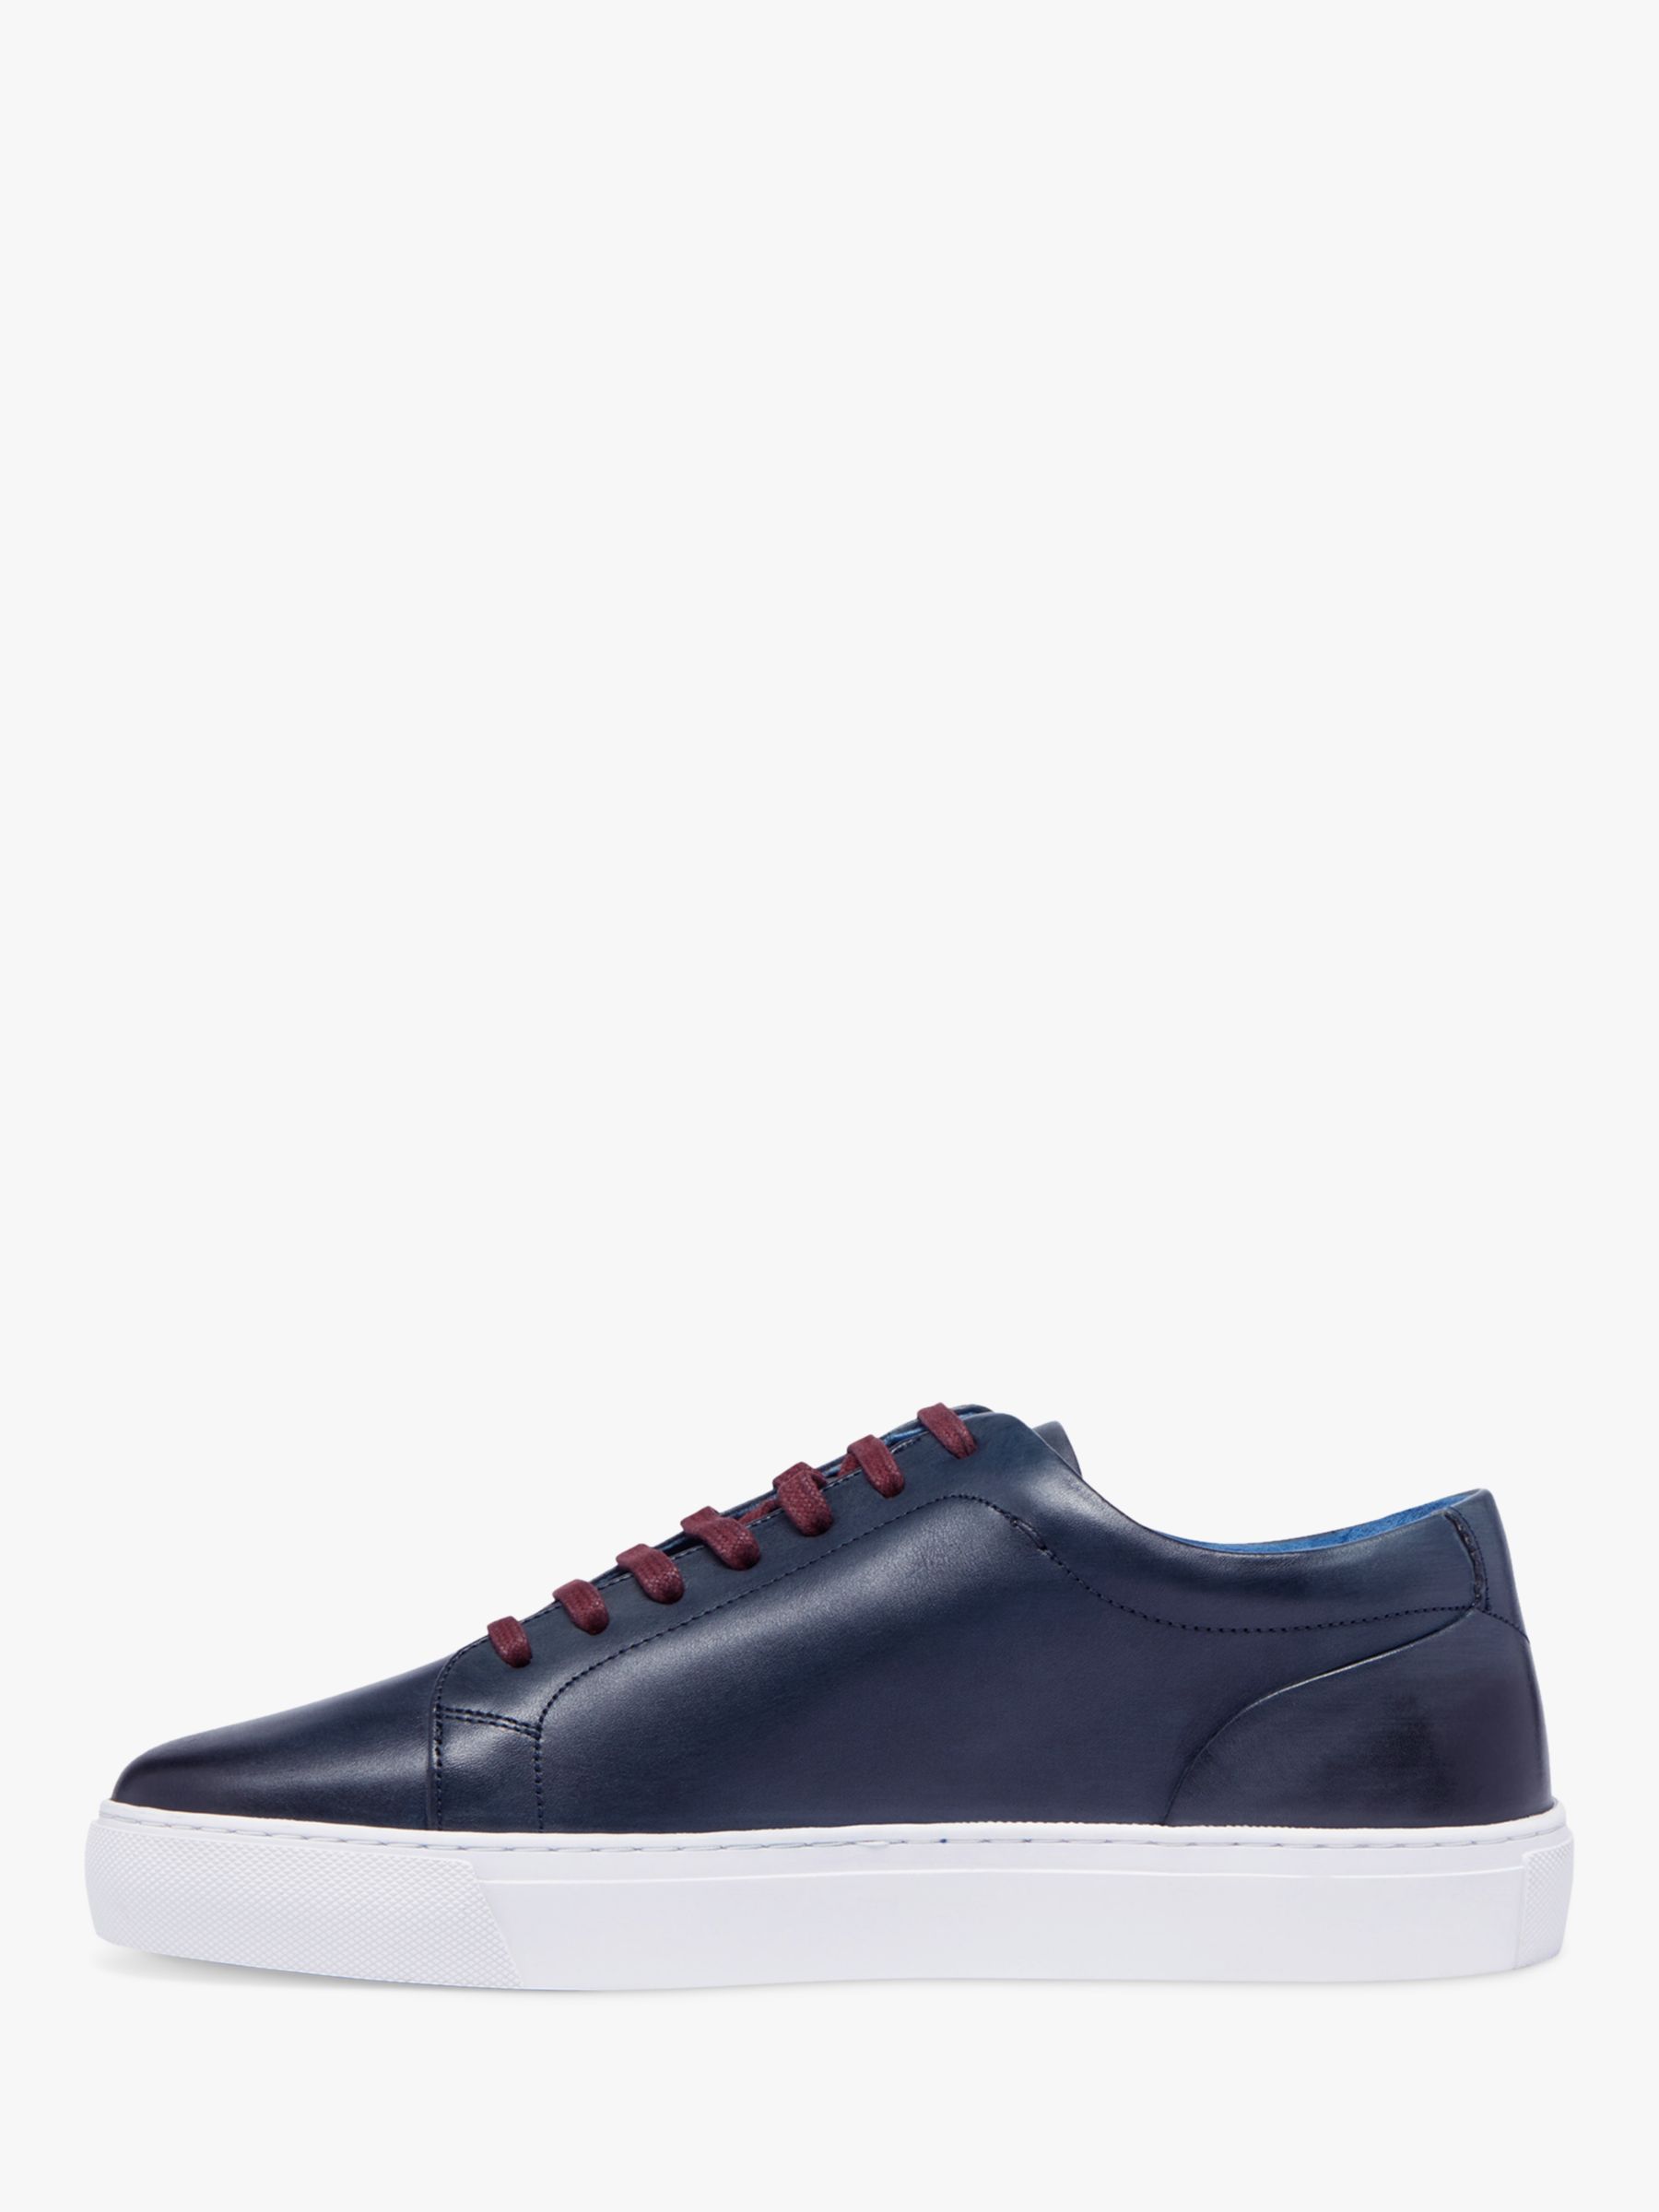 Oliver Sweeney Hayle Leather Trainers